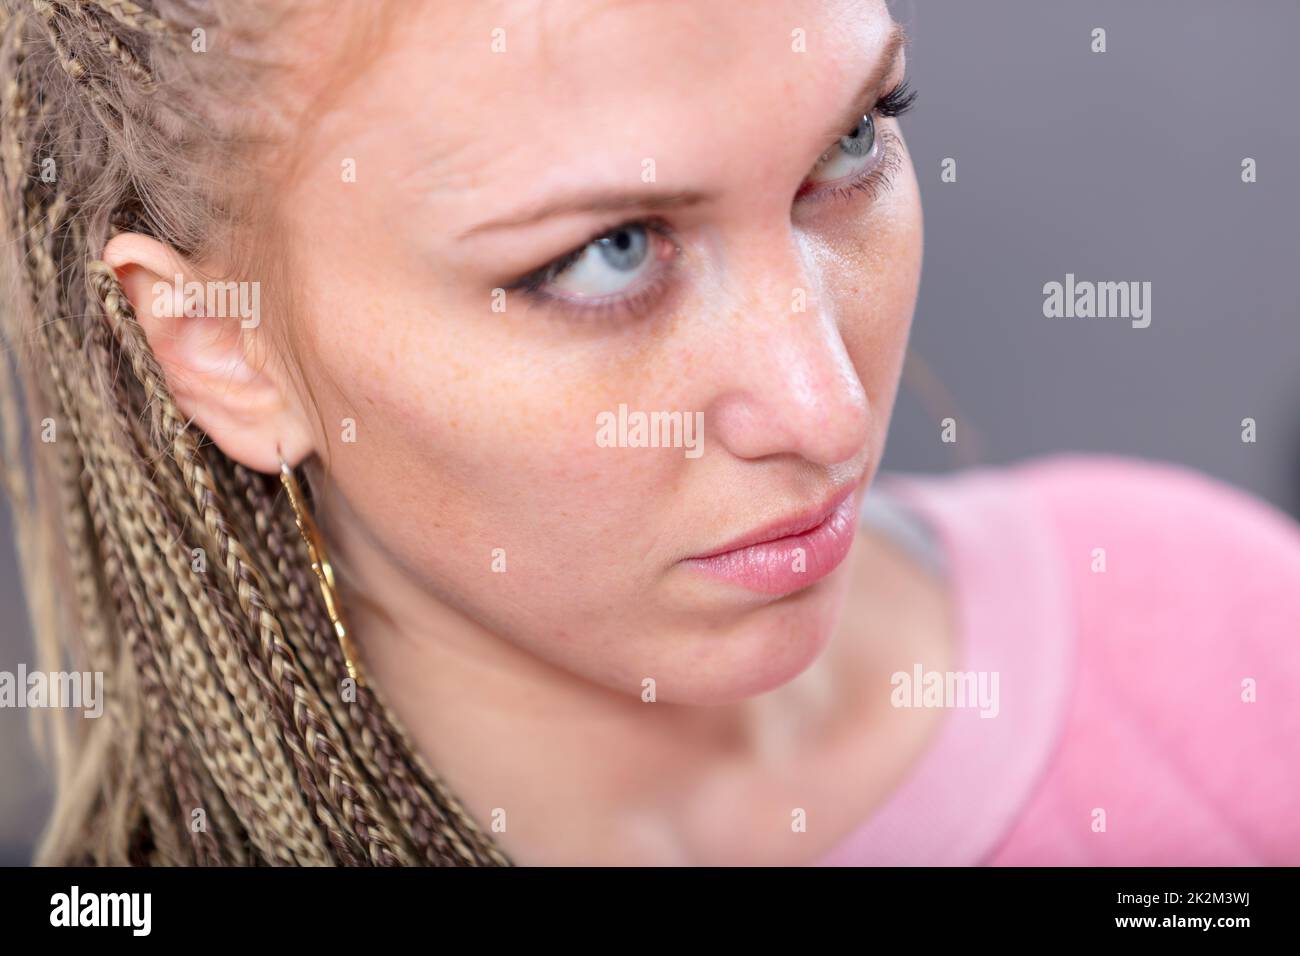 Attractive blond woman with soulful blue eyes Stock Photo